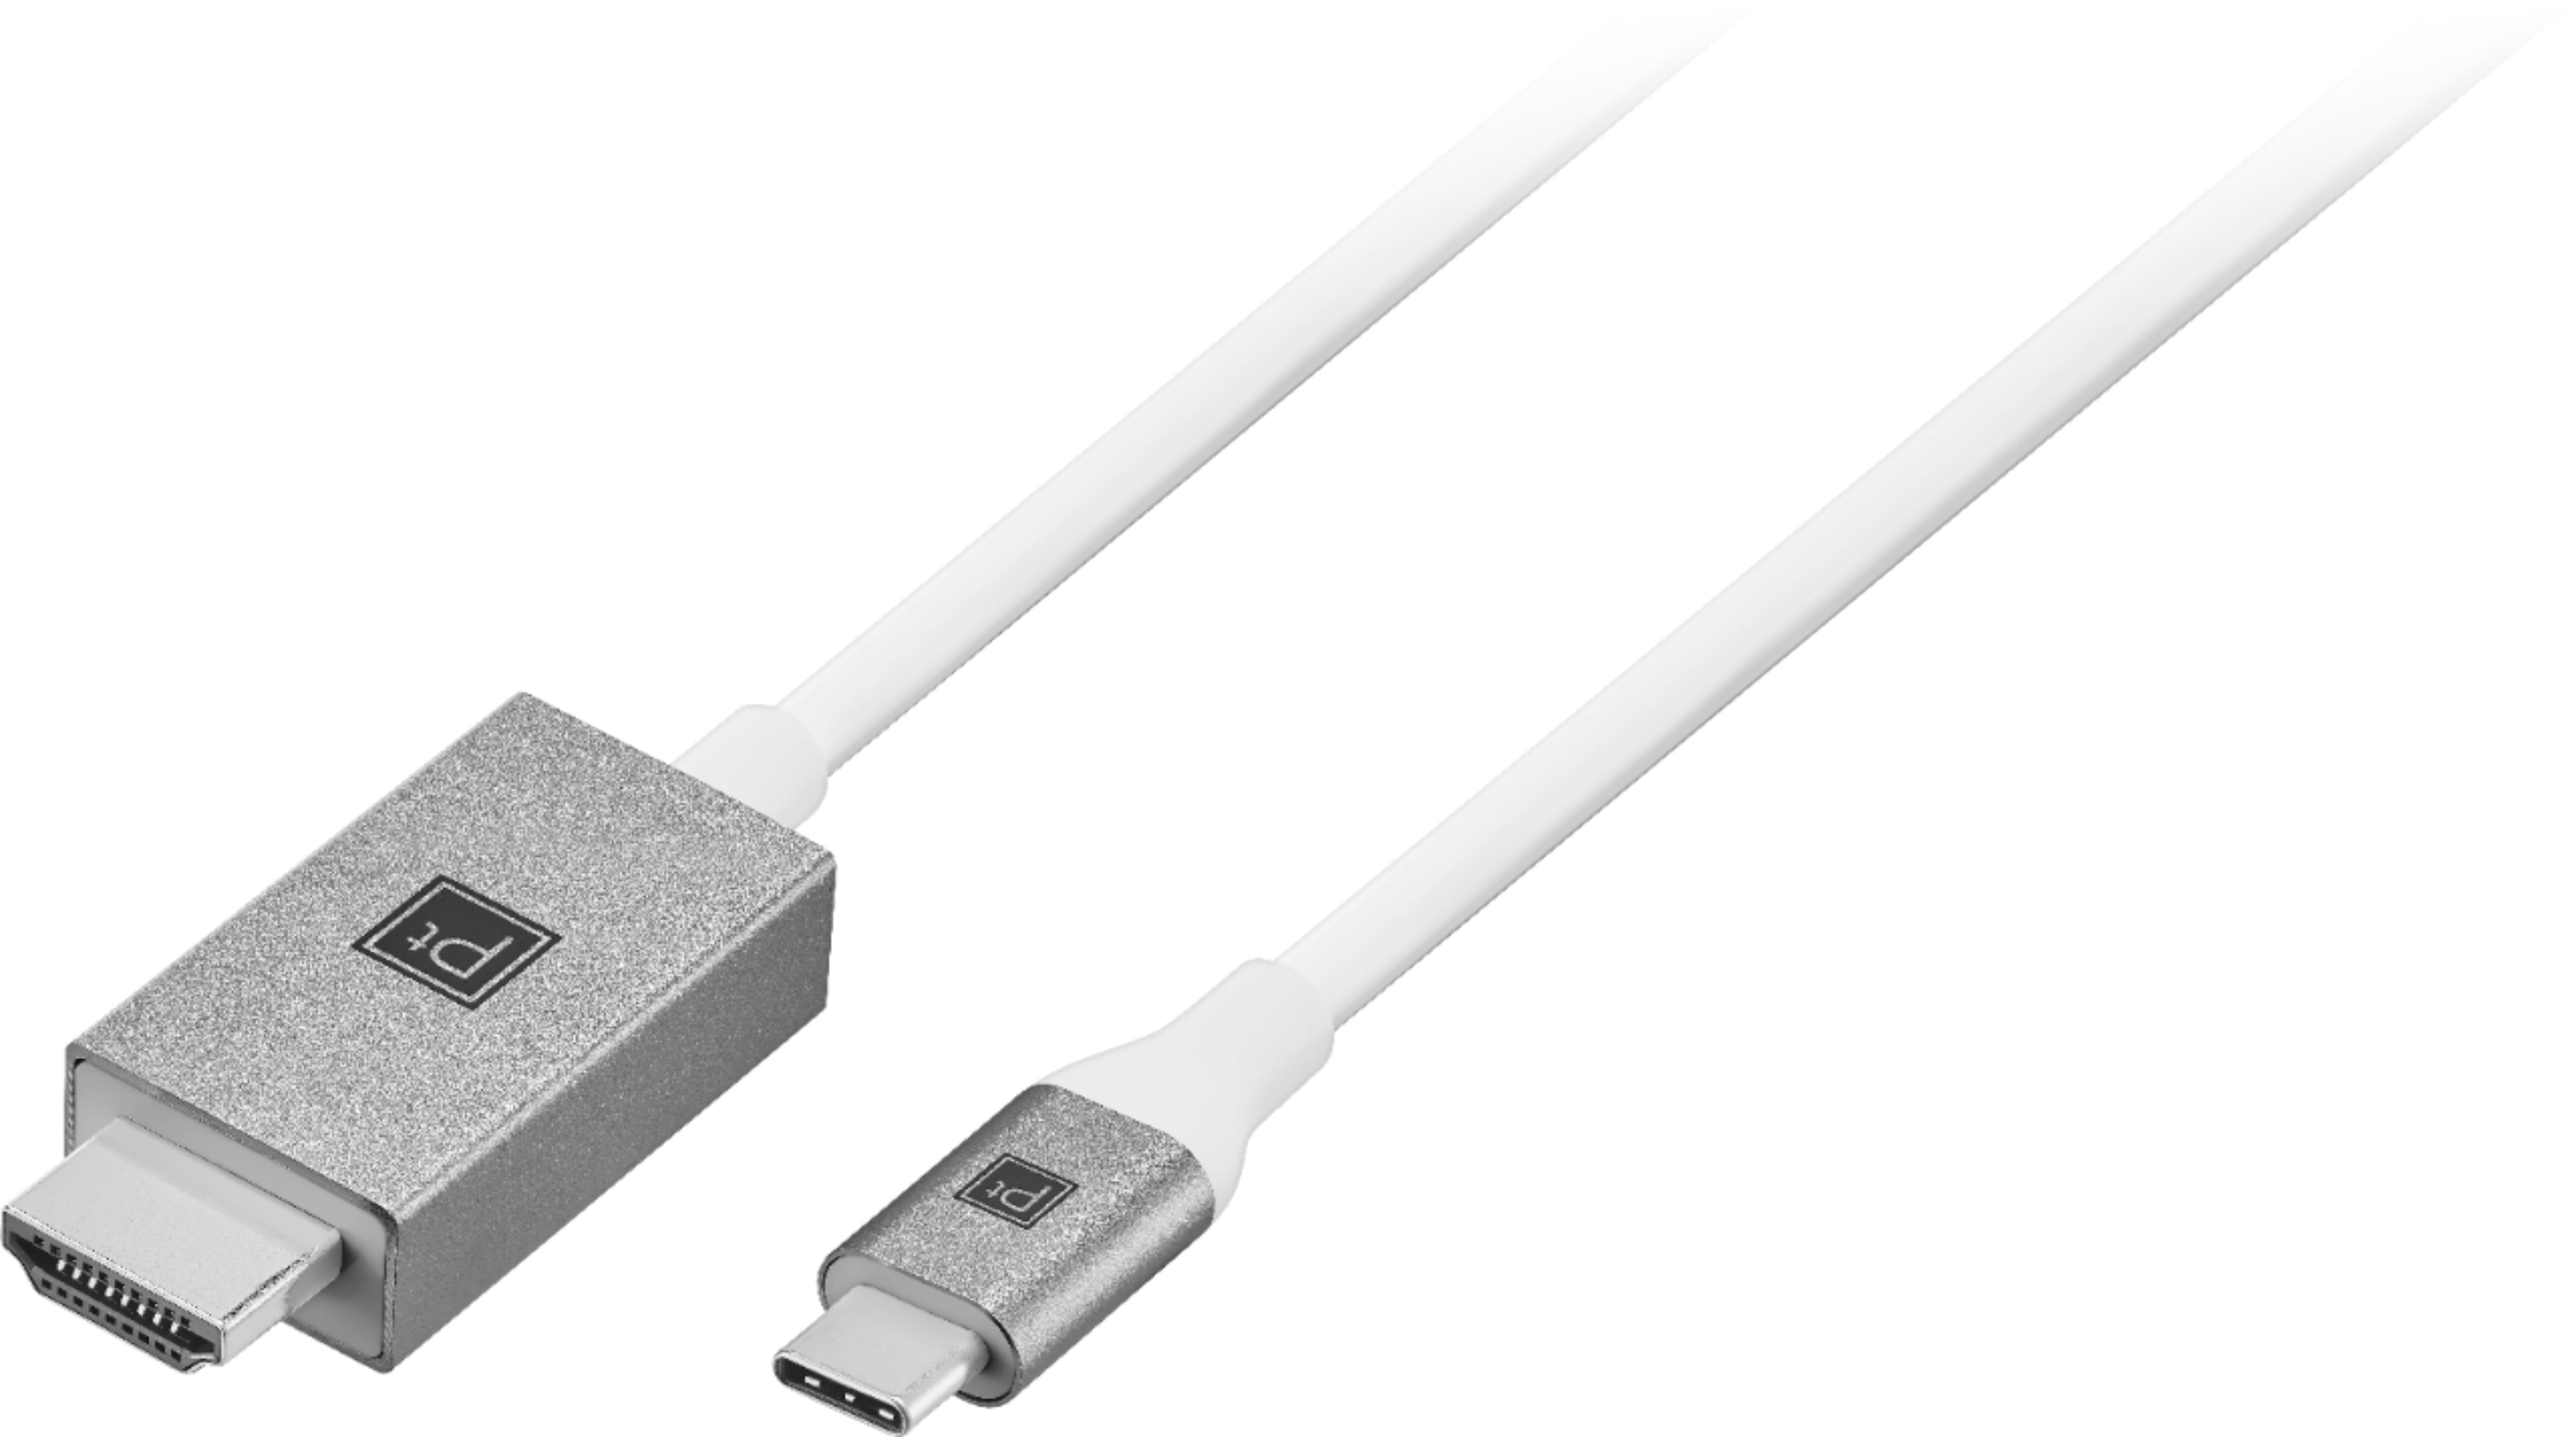 Platinum™ 6' USB-C to 4K HDMI Cable for MacBook, Chromebook Laptops with a Port PT-PCCXHDMI6 - Best